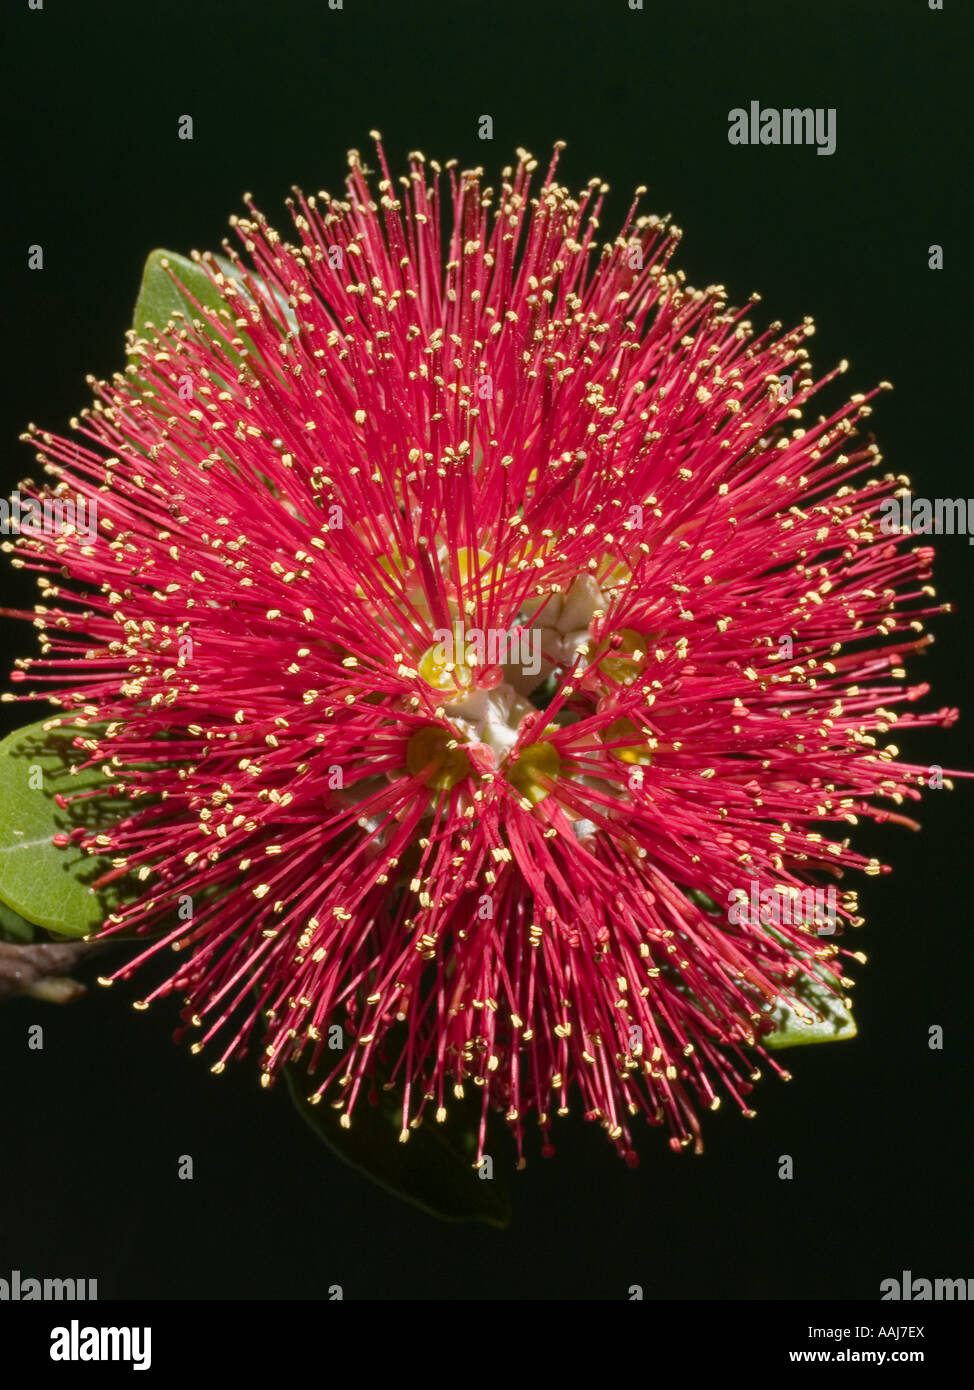 Close up of the New Zealand Pohutukawa tree flower Metrosideros excelsus Stock Photo